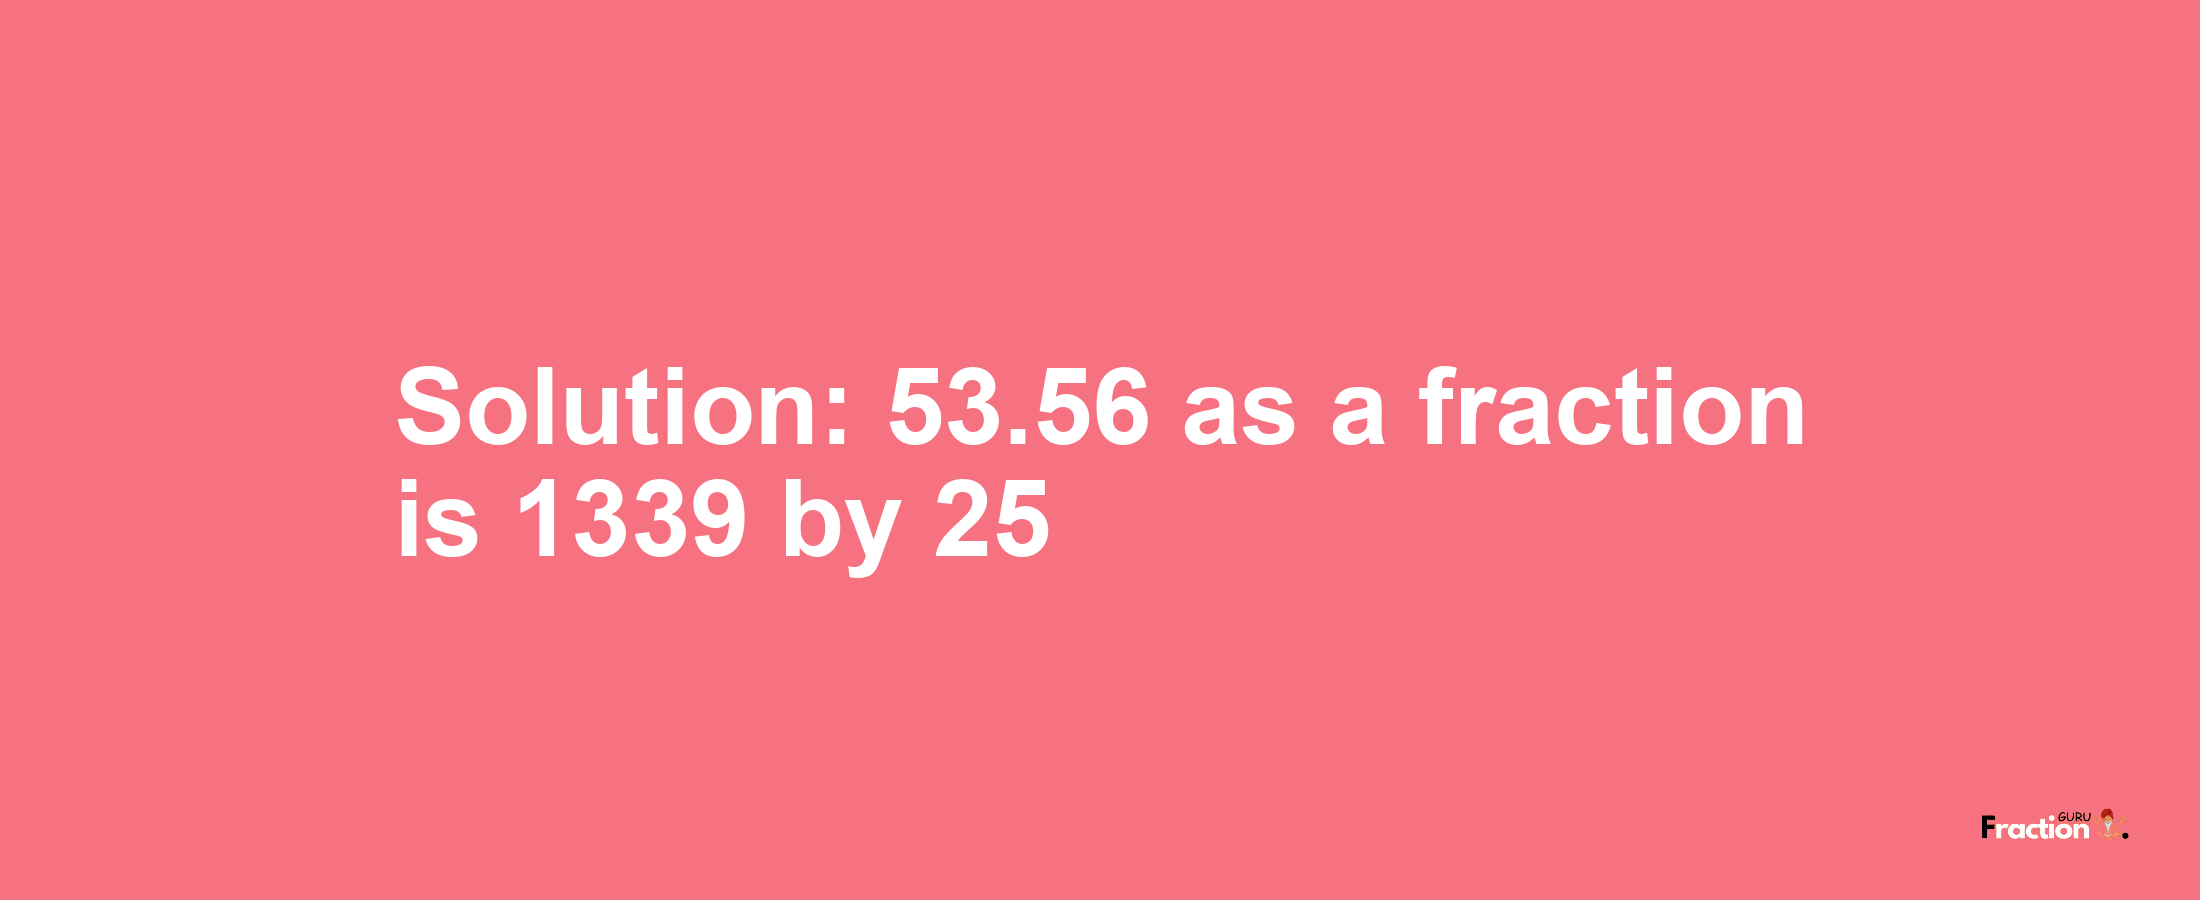 Solution:53.56 as a fraction is 1339/25